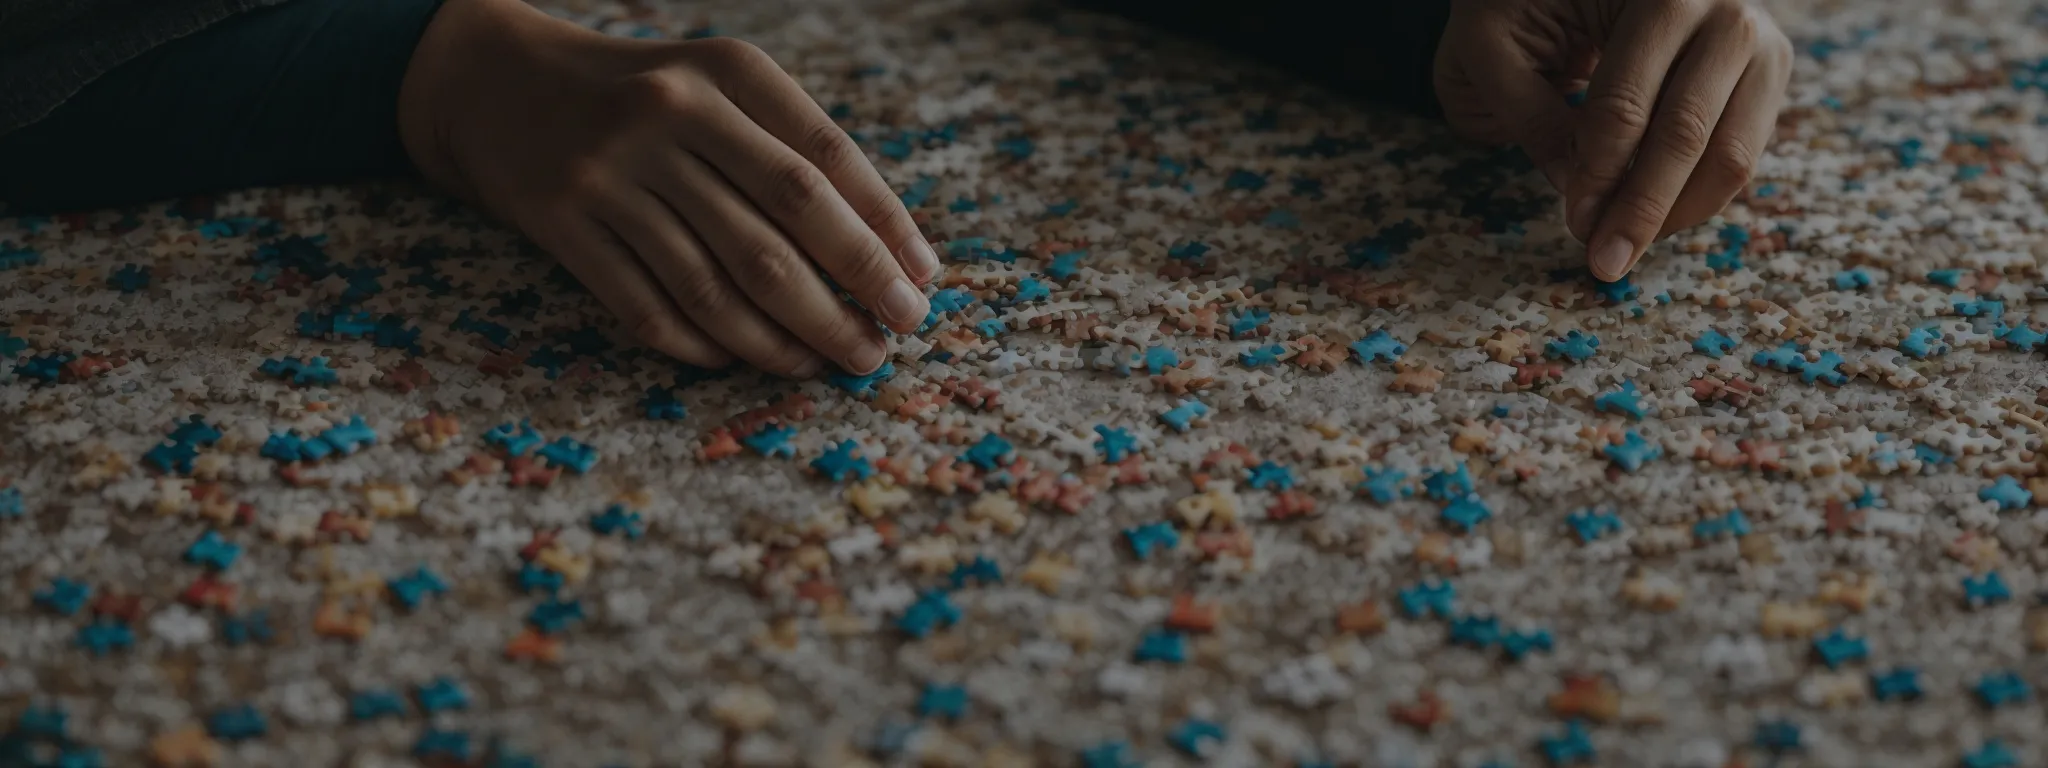 a person pondering over a jigsaw puzzle representing the complexities of search intent in seo.